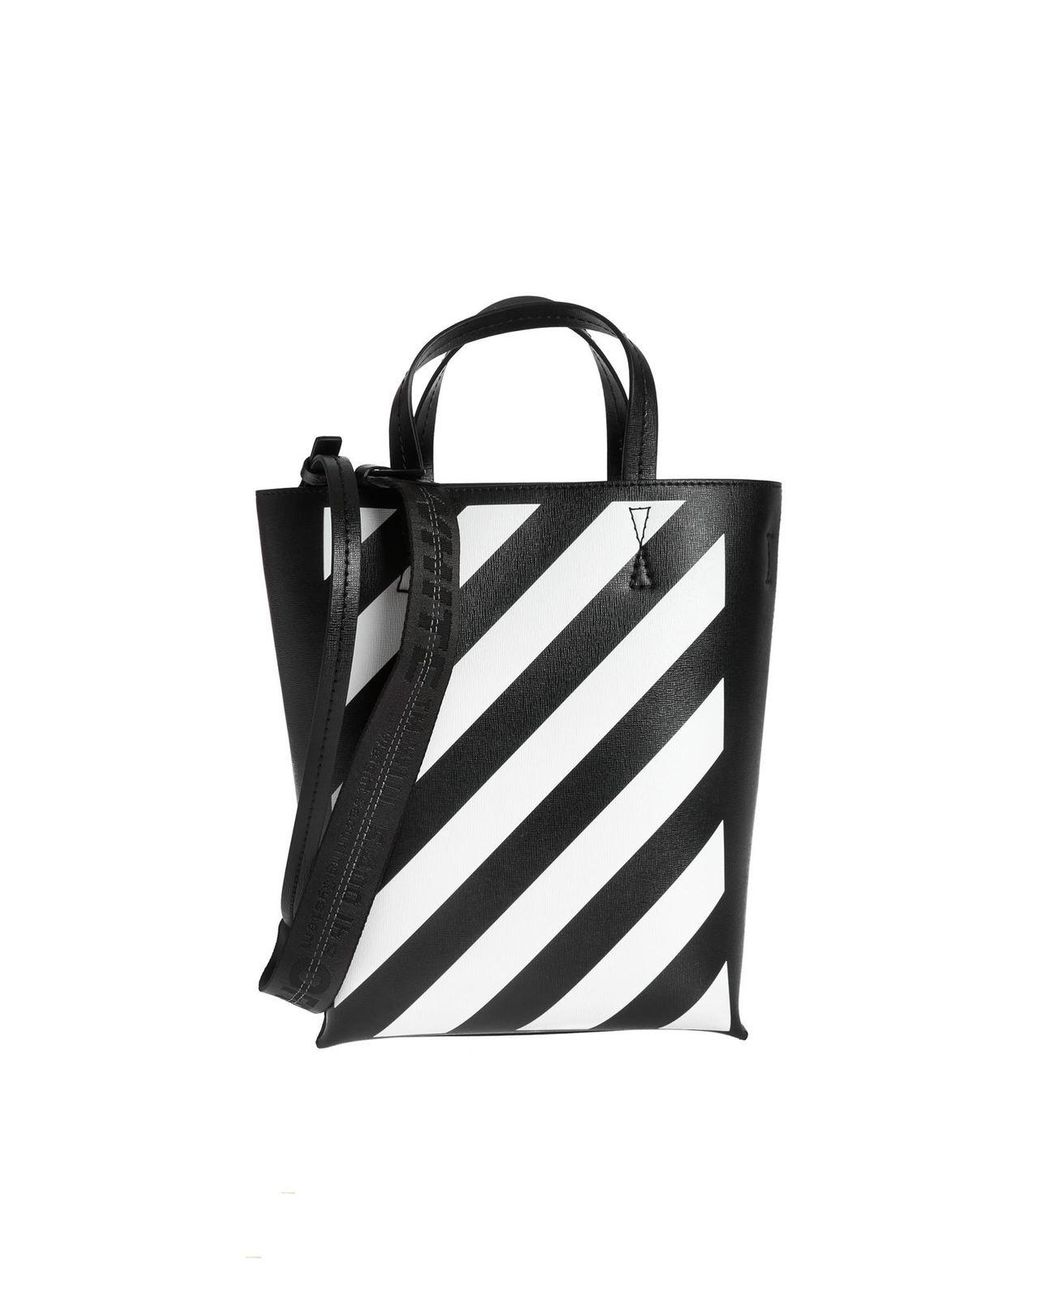 Off-White c/o Virgil Abloh Leather Diag Tote Bag in Black - Lyst